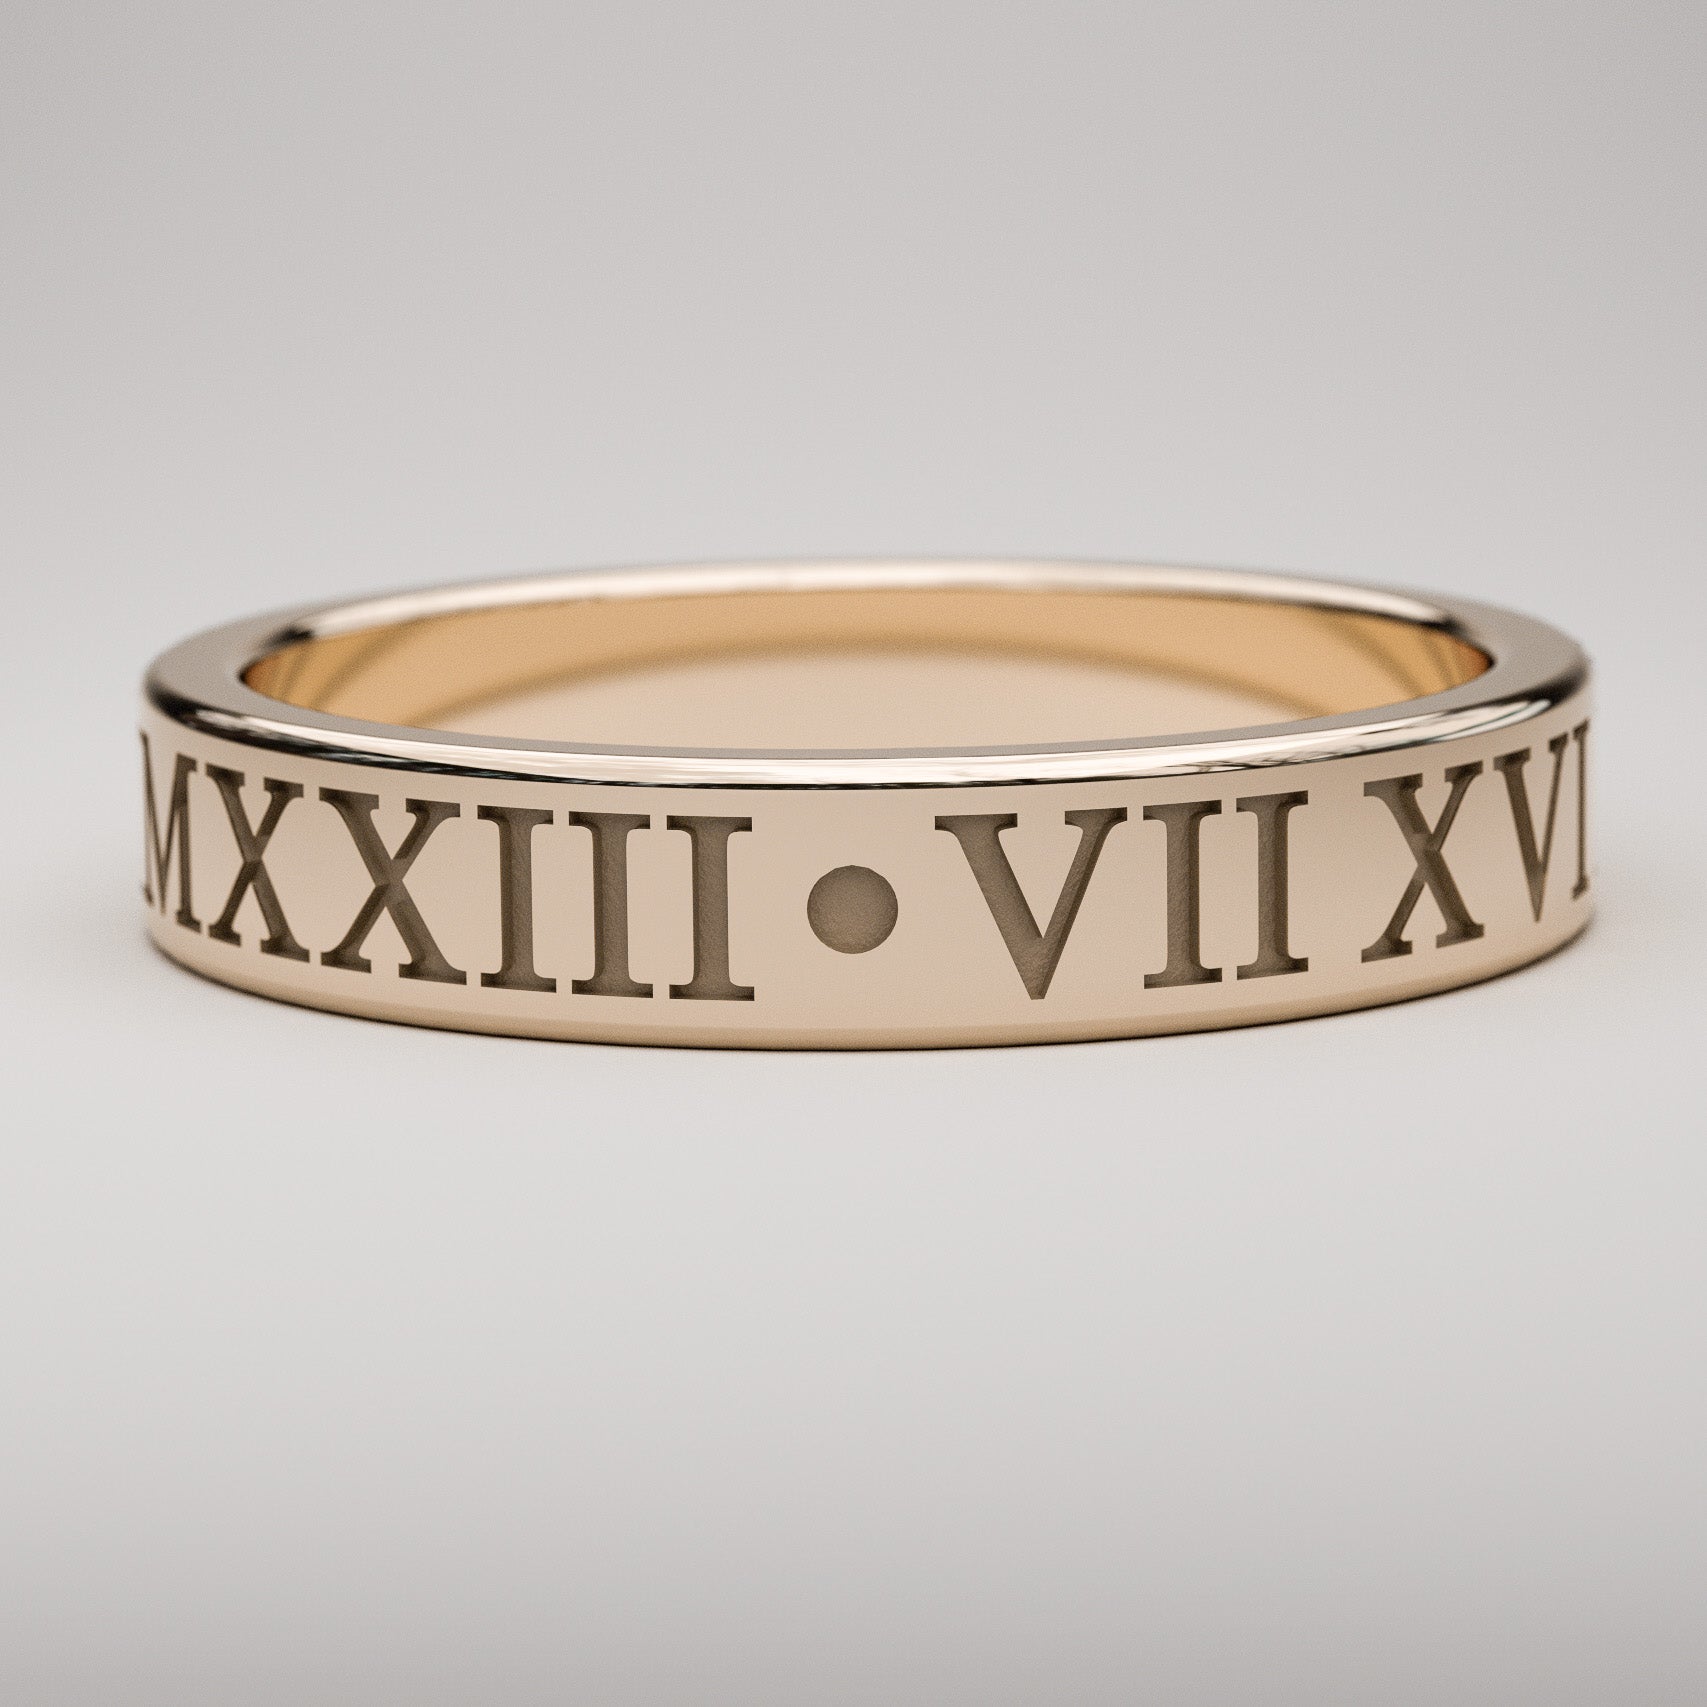 4mm wide personalized Roman Numeral band in rose gold